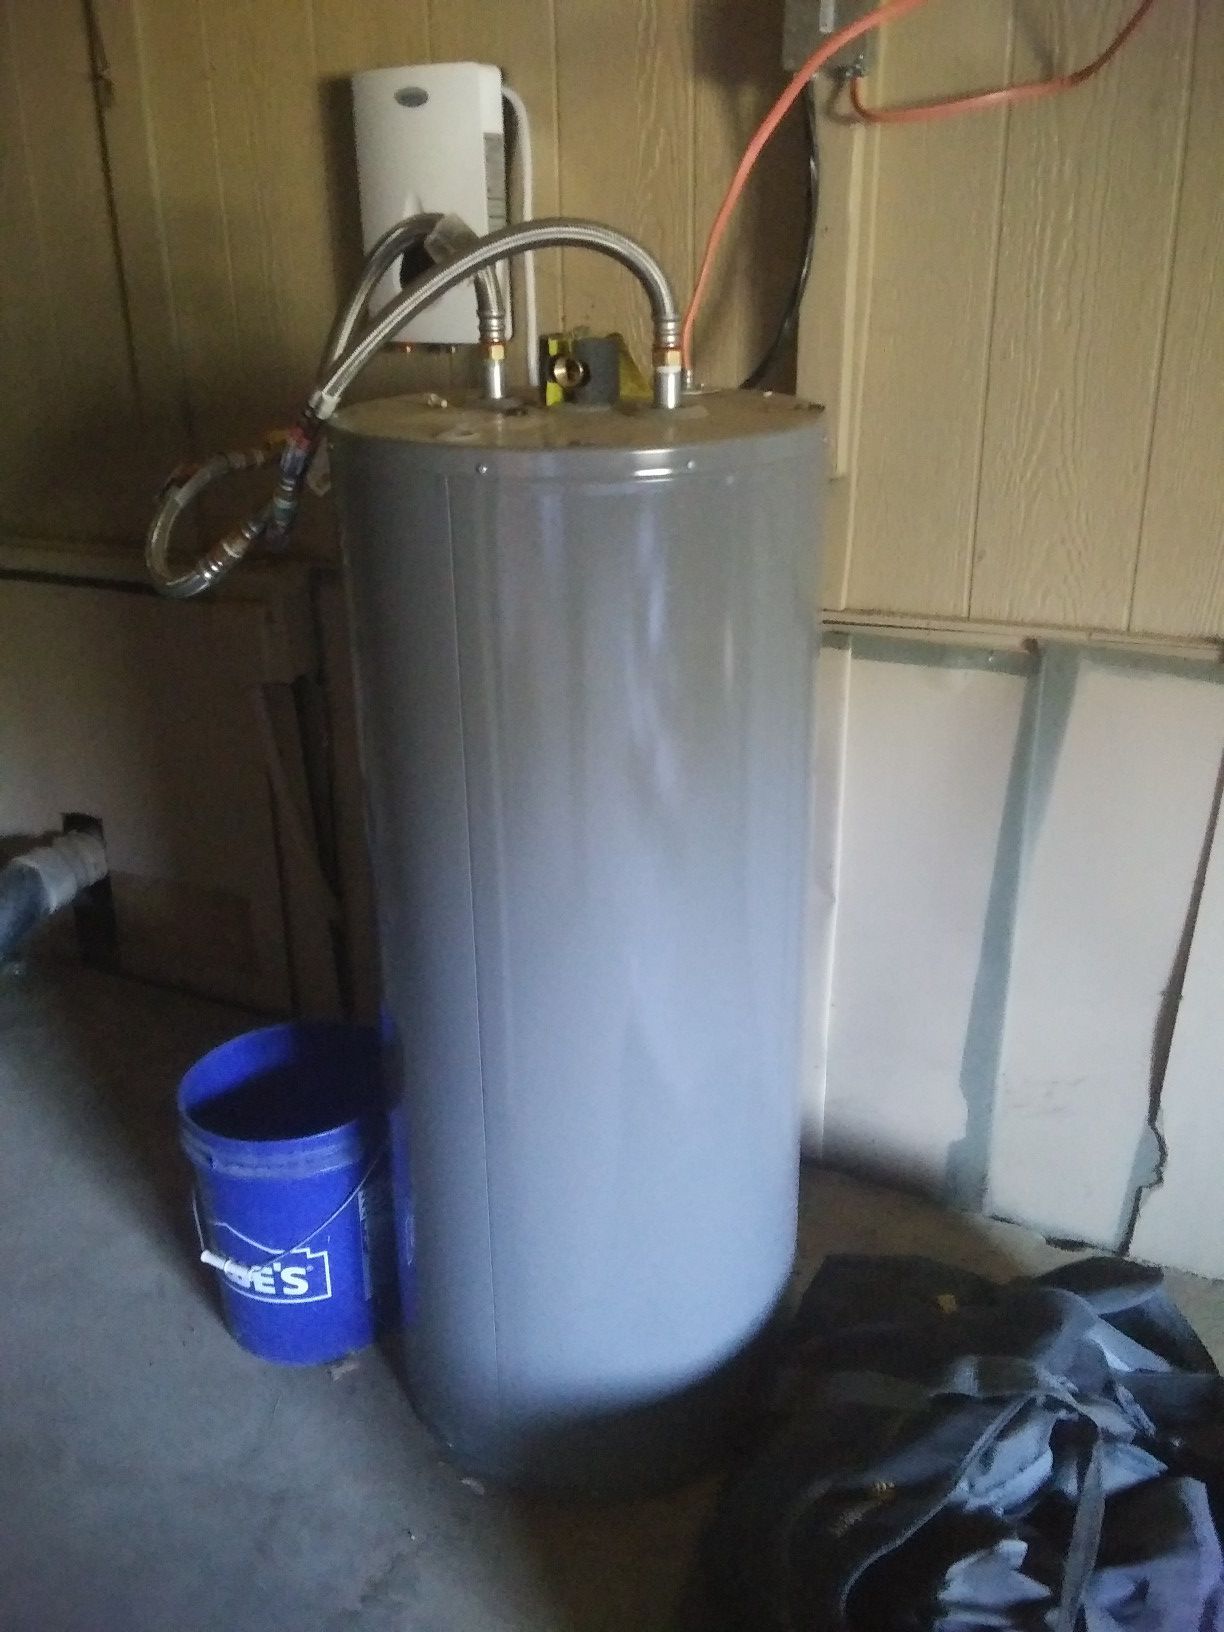 40 gallon hot water heater barely used